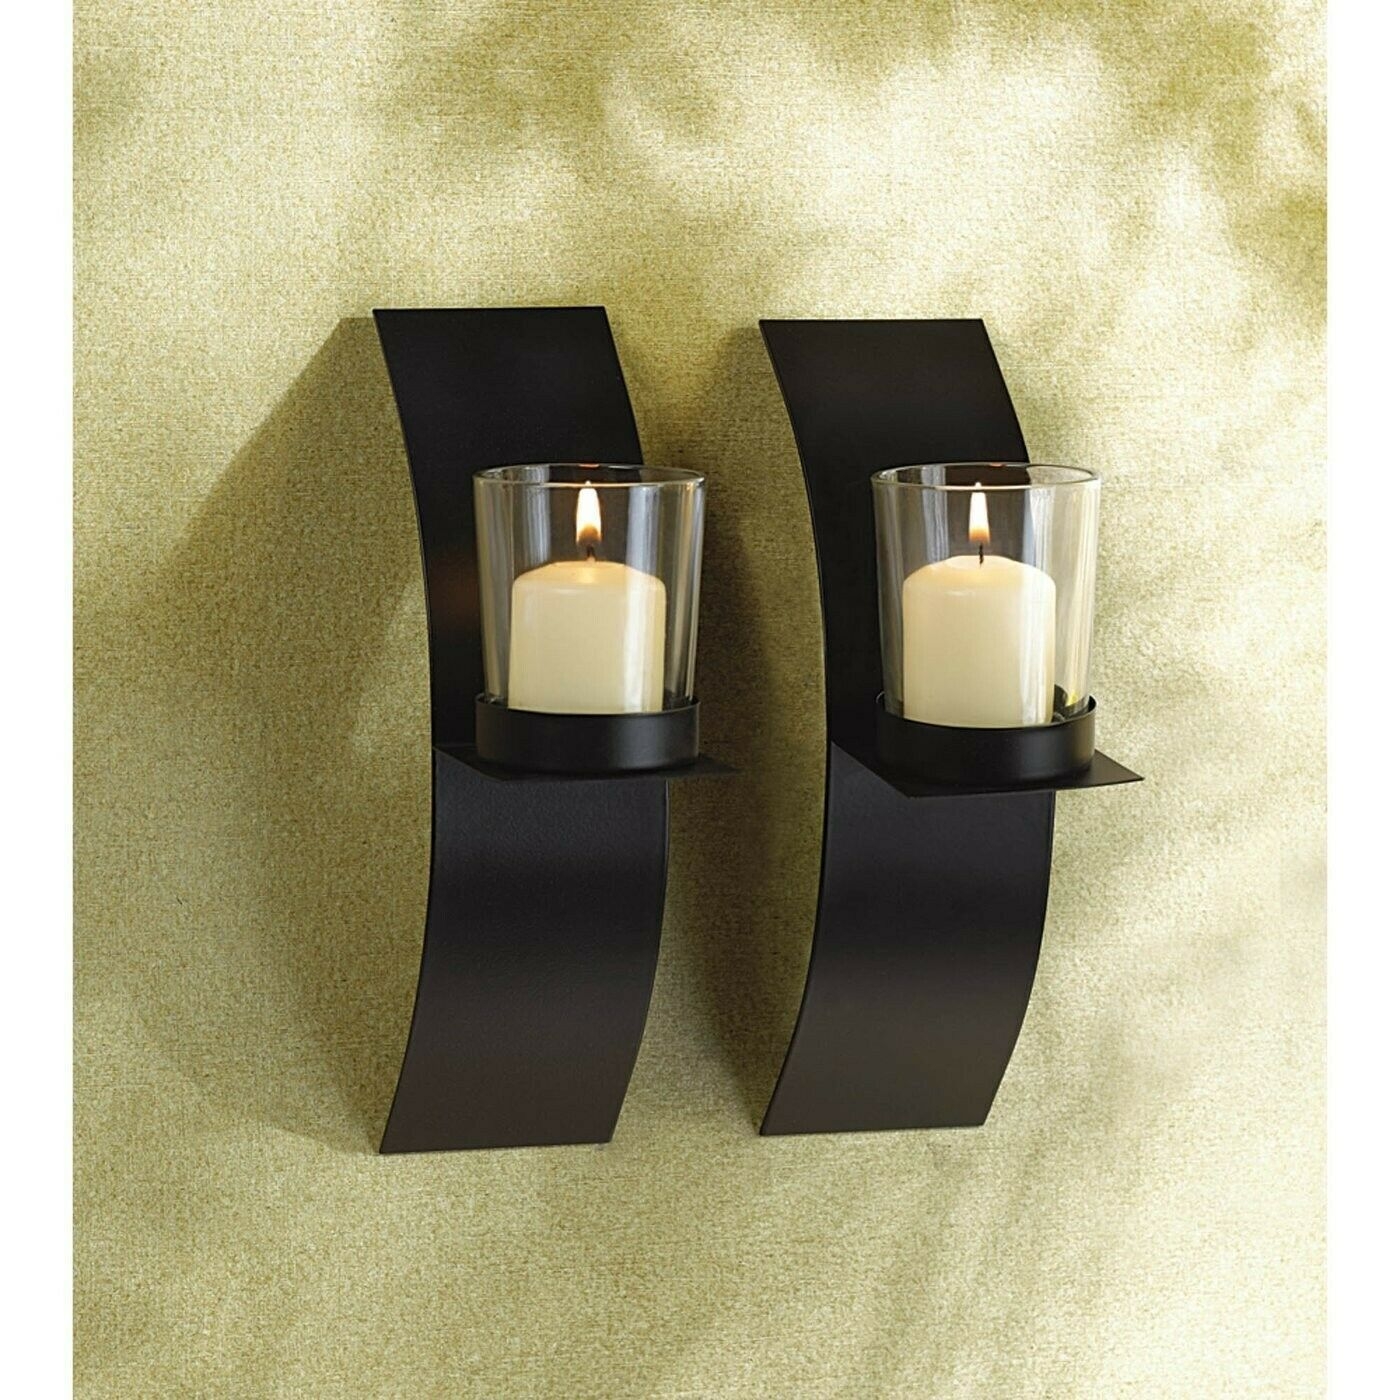 Dining Room Bathroom Set of 2 MISUMISO Wall Sconces Candle Holders Classic Metal Acrylic Wall Decorations for Living Room